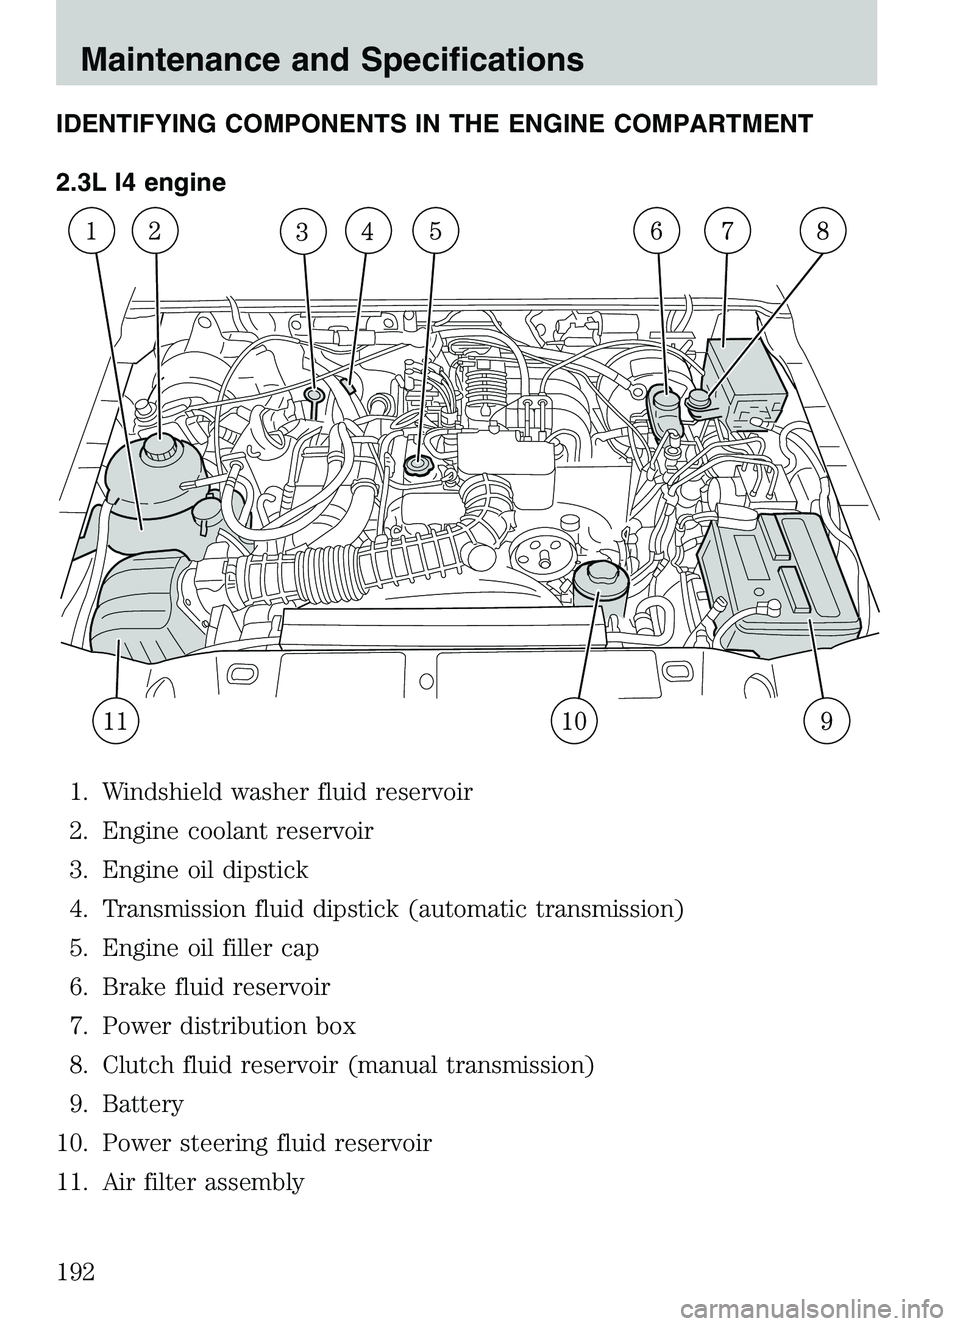 MAZDA MODEL B4000 2003  Owners Manual IDENTIFYING COMPONENTS IN THE ENGINE COMPARTMENT
2.3L I4 engine1. Windshield washer fluid reservoir
2. Engine coolant reservoir
3. Engine oil dipstick
4. Transmission fluid dipstick (automatic transmi